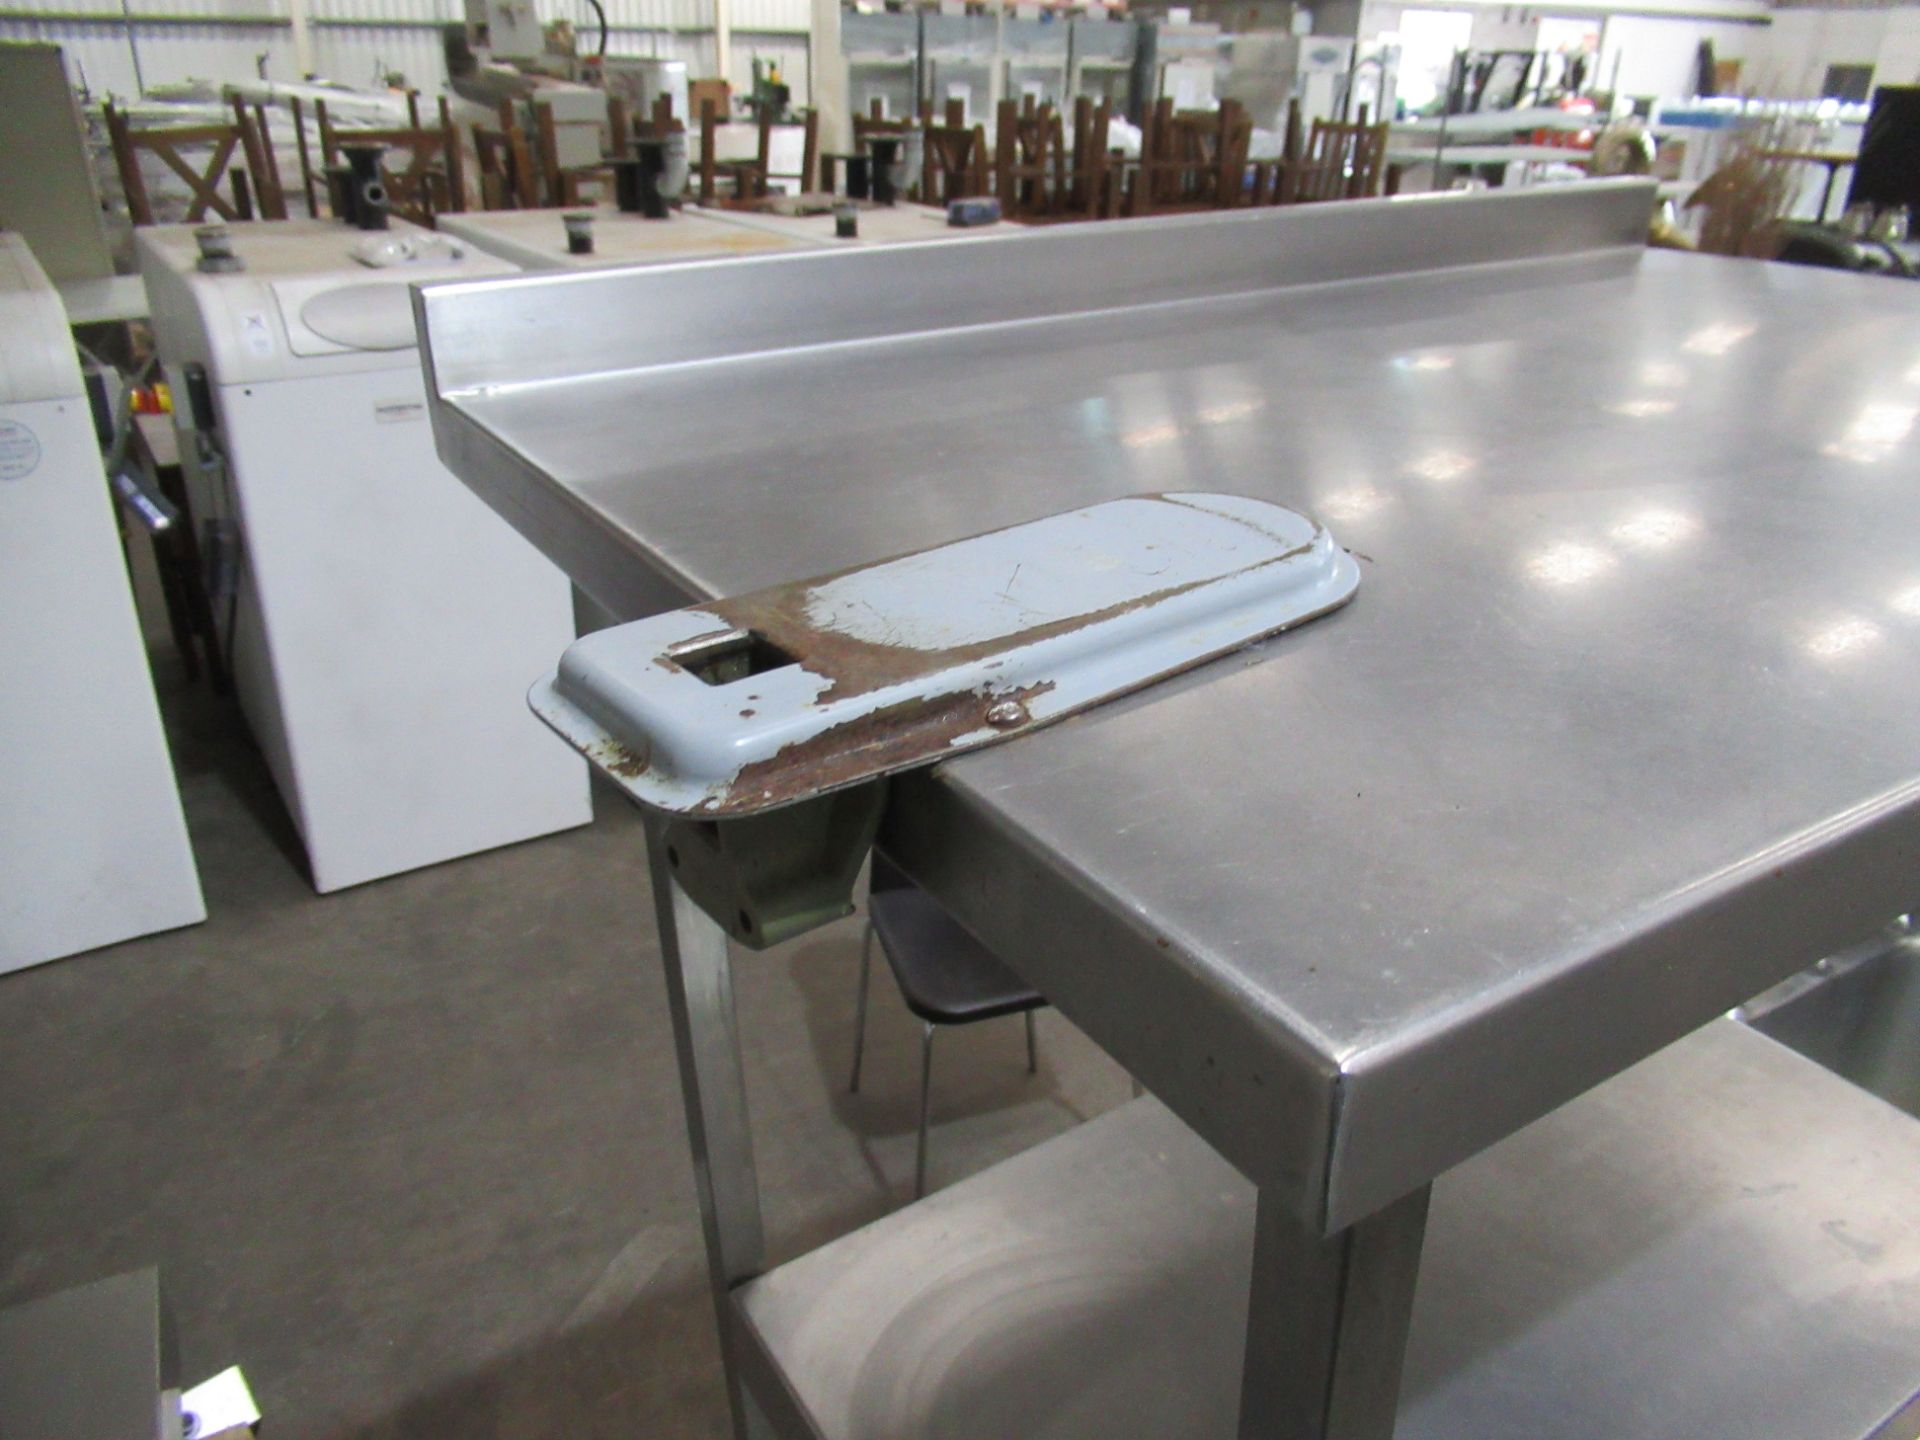 2x Stainless Steel Two Tier Prep Tables with Splashback - Image 4 of 4